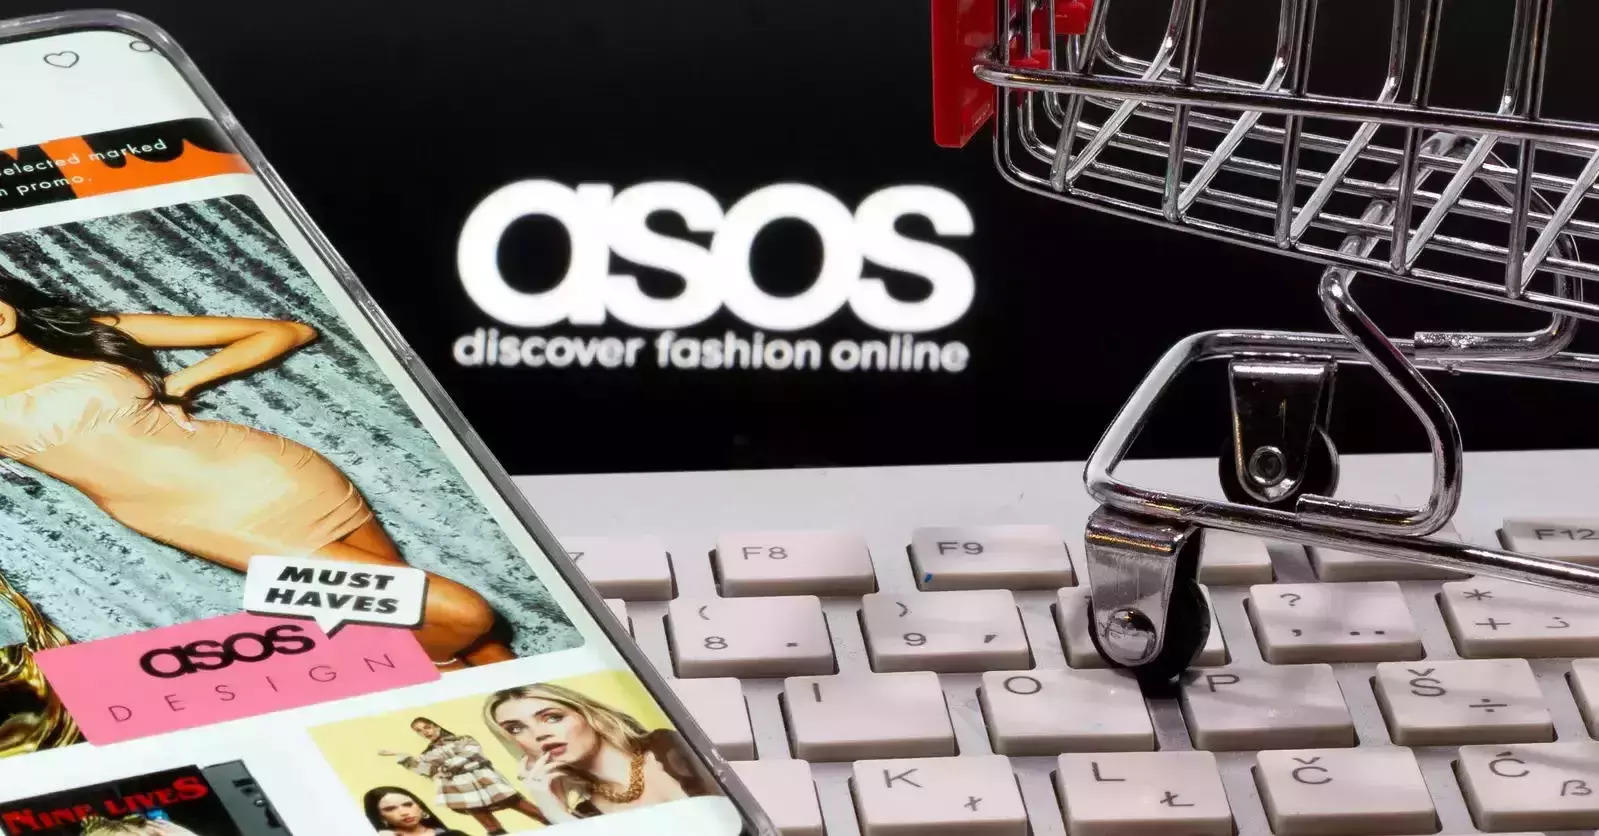 Online fashion retailers ASOS, Boohoo weighed down by returns